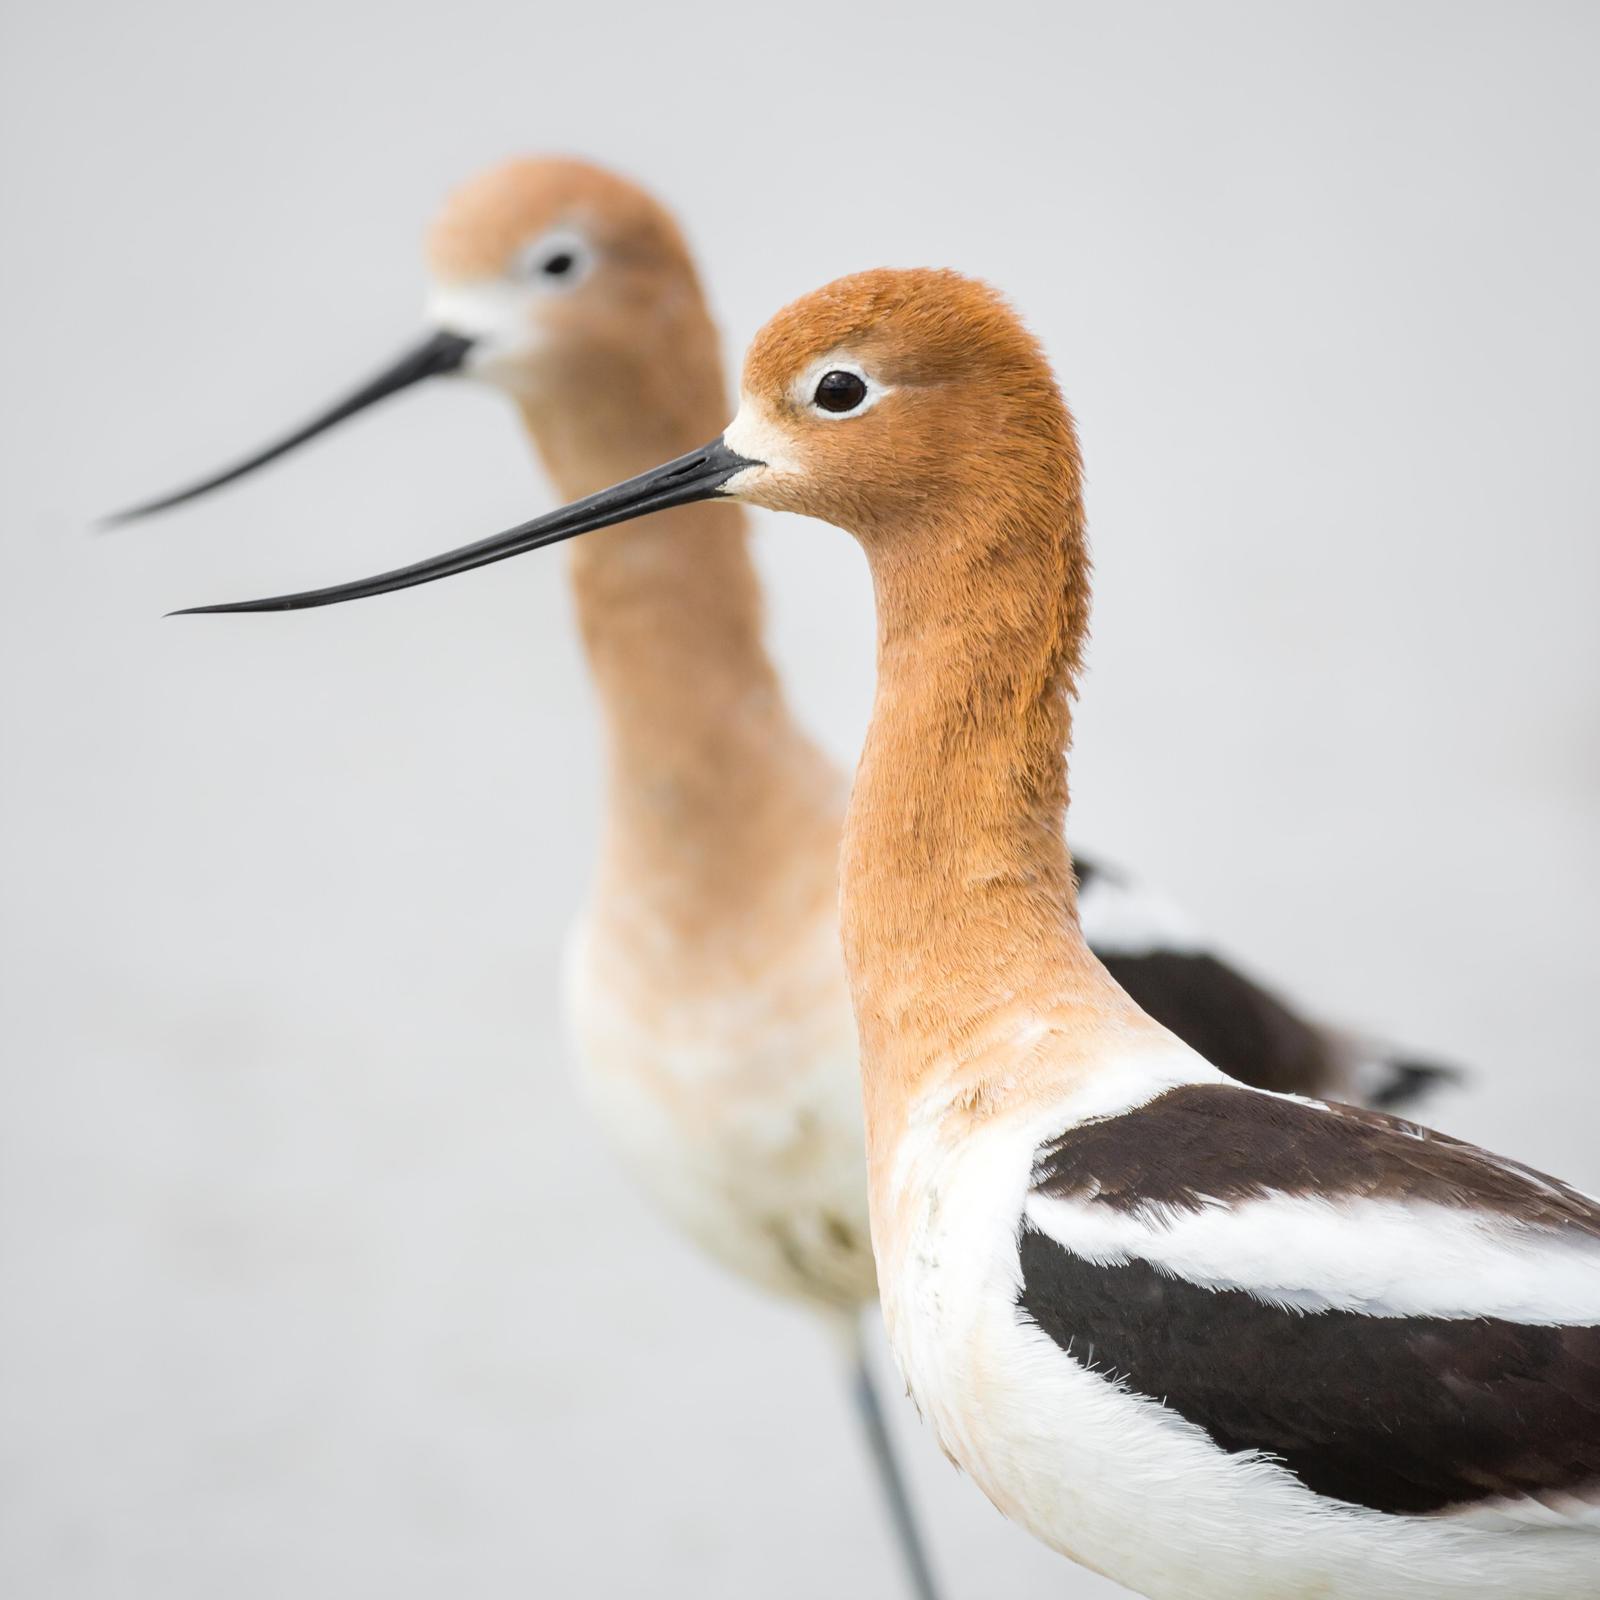 American Avocet Photo by Jesse Hodges